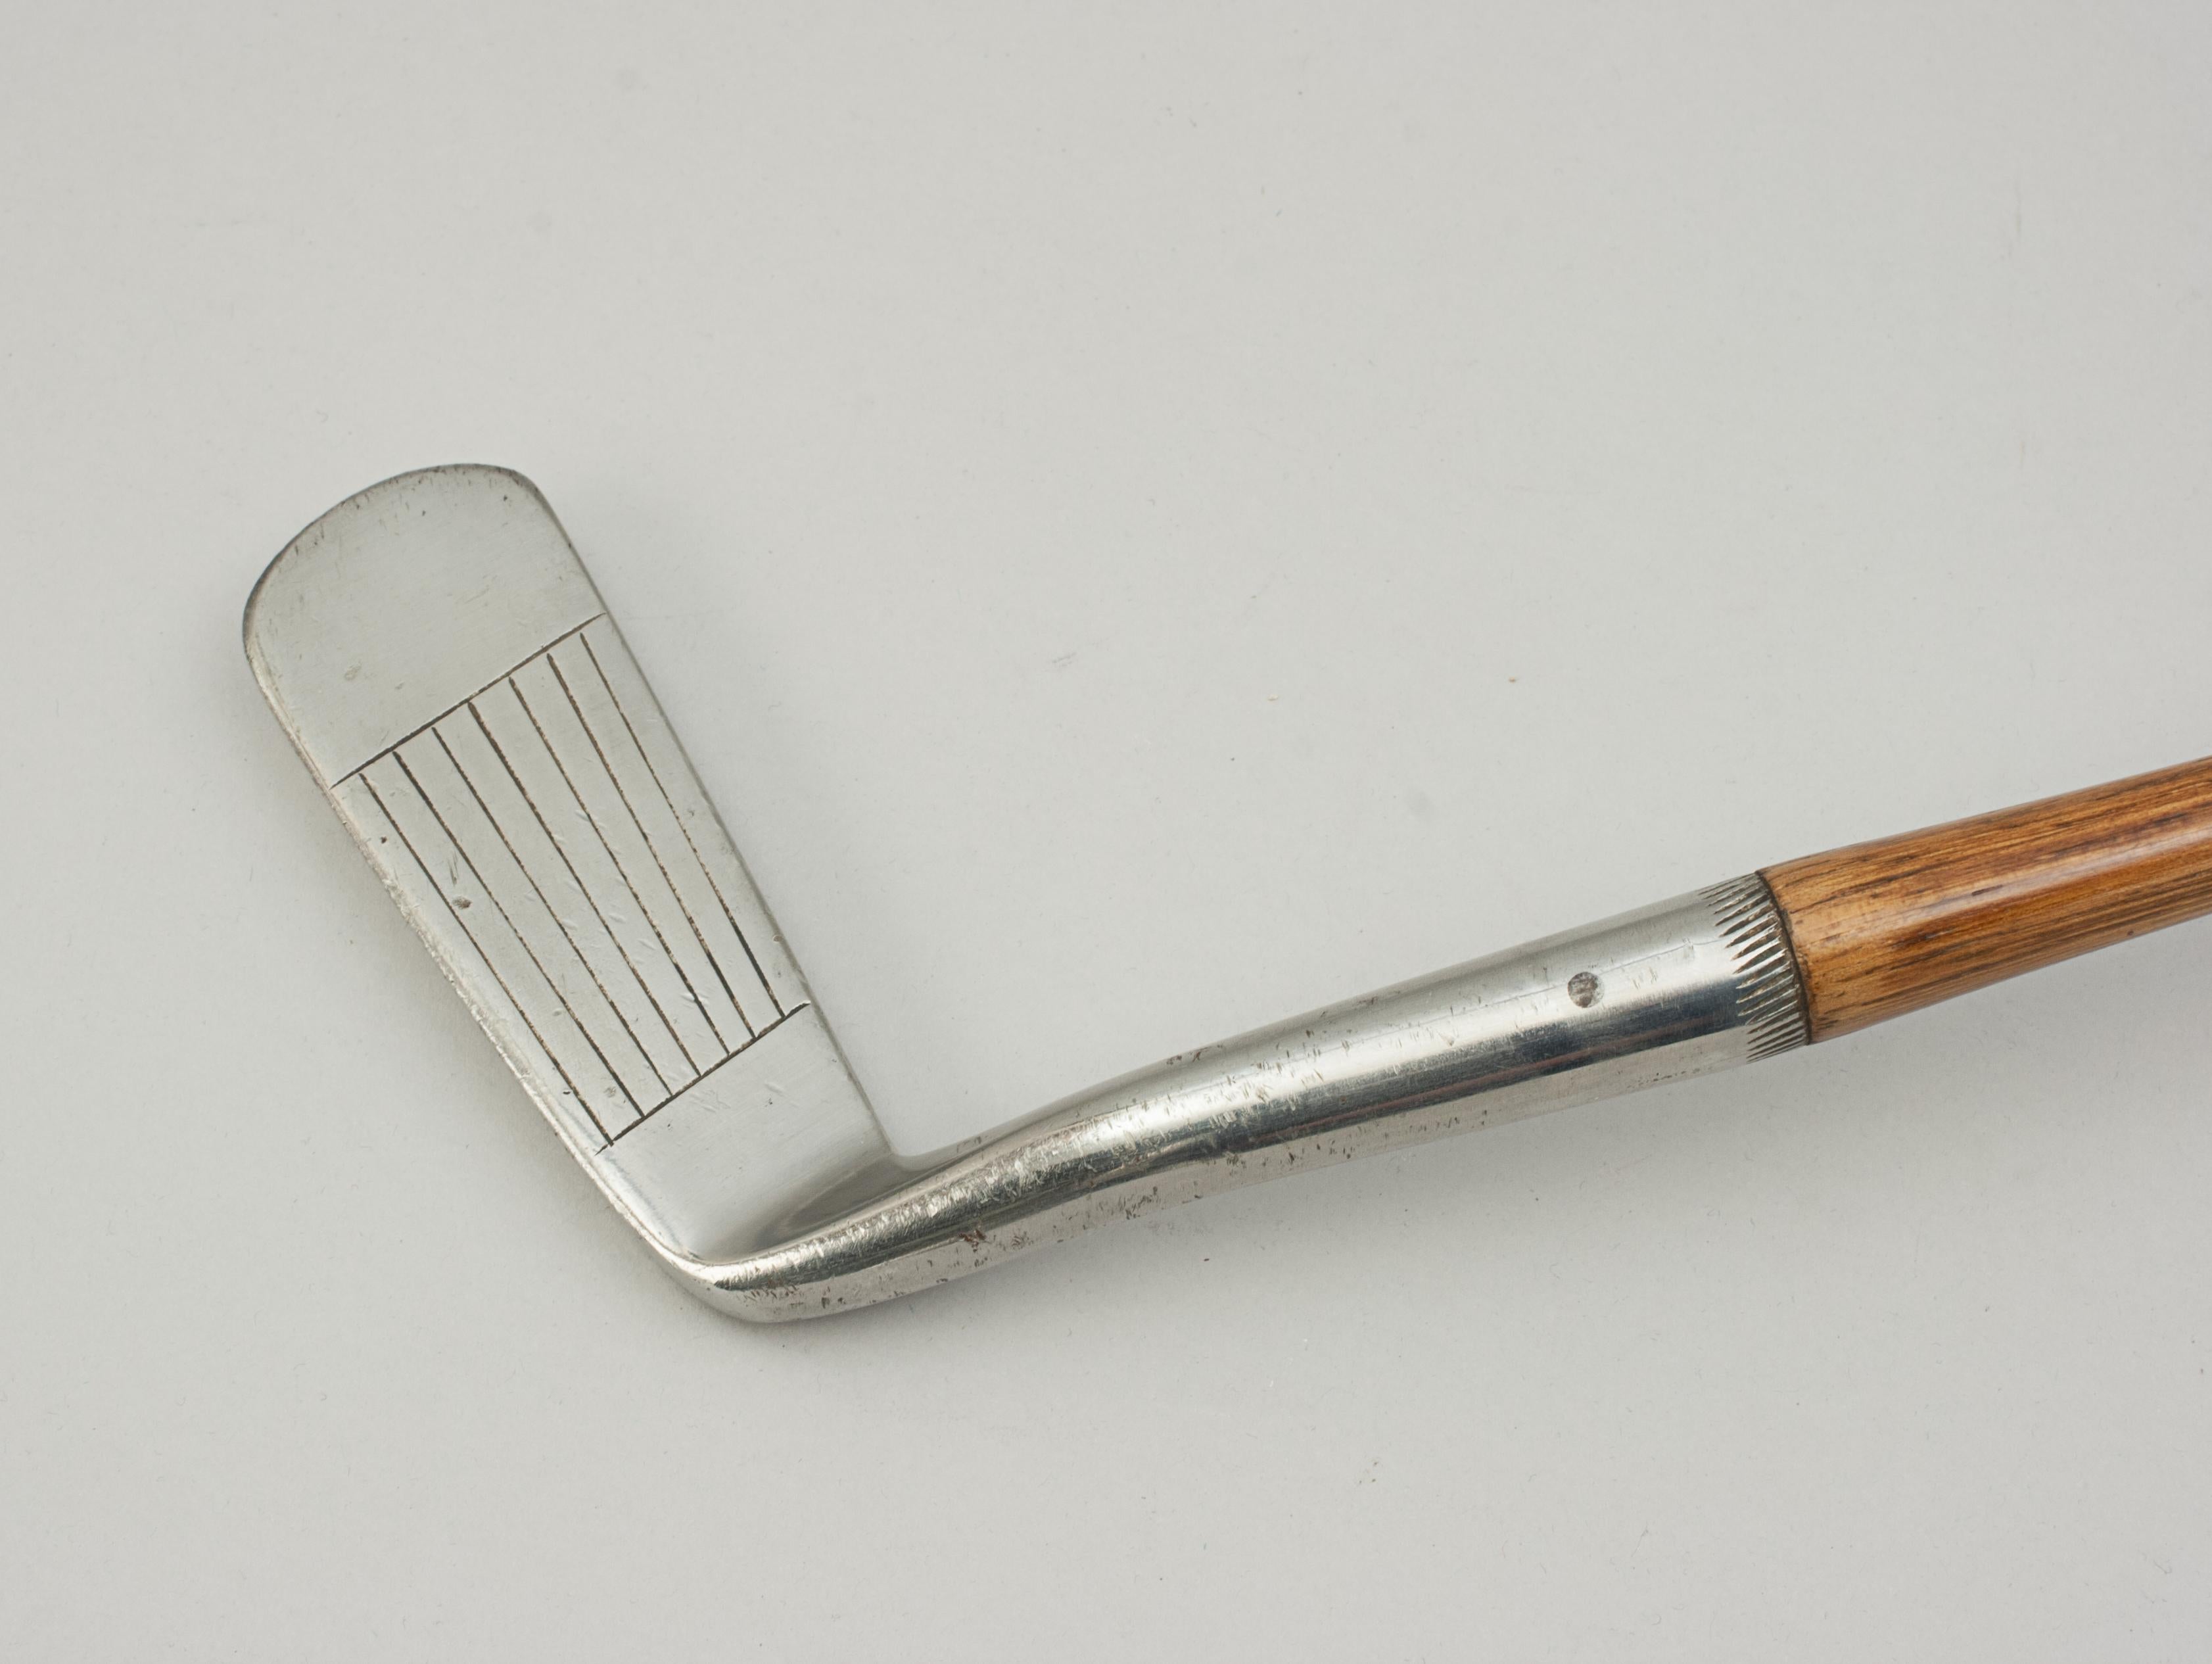 Early 20th Century Hickory Golf Club, Spalding Wryneck Putter